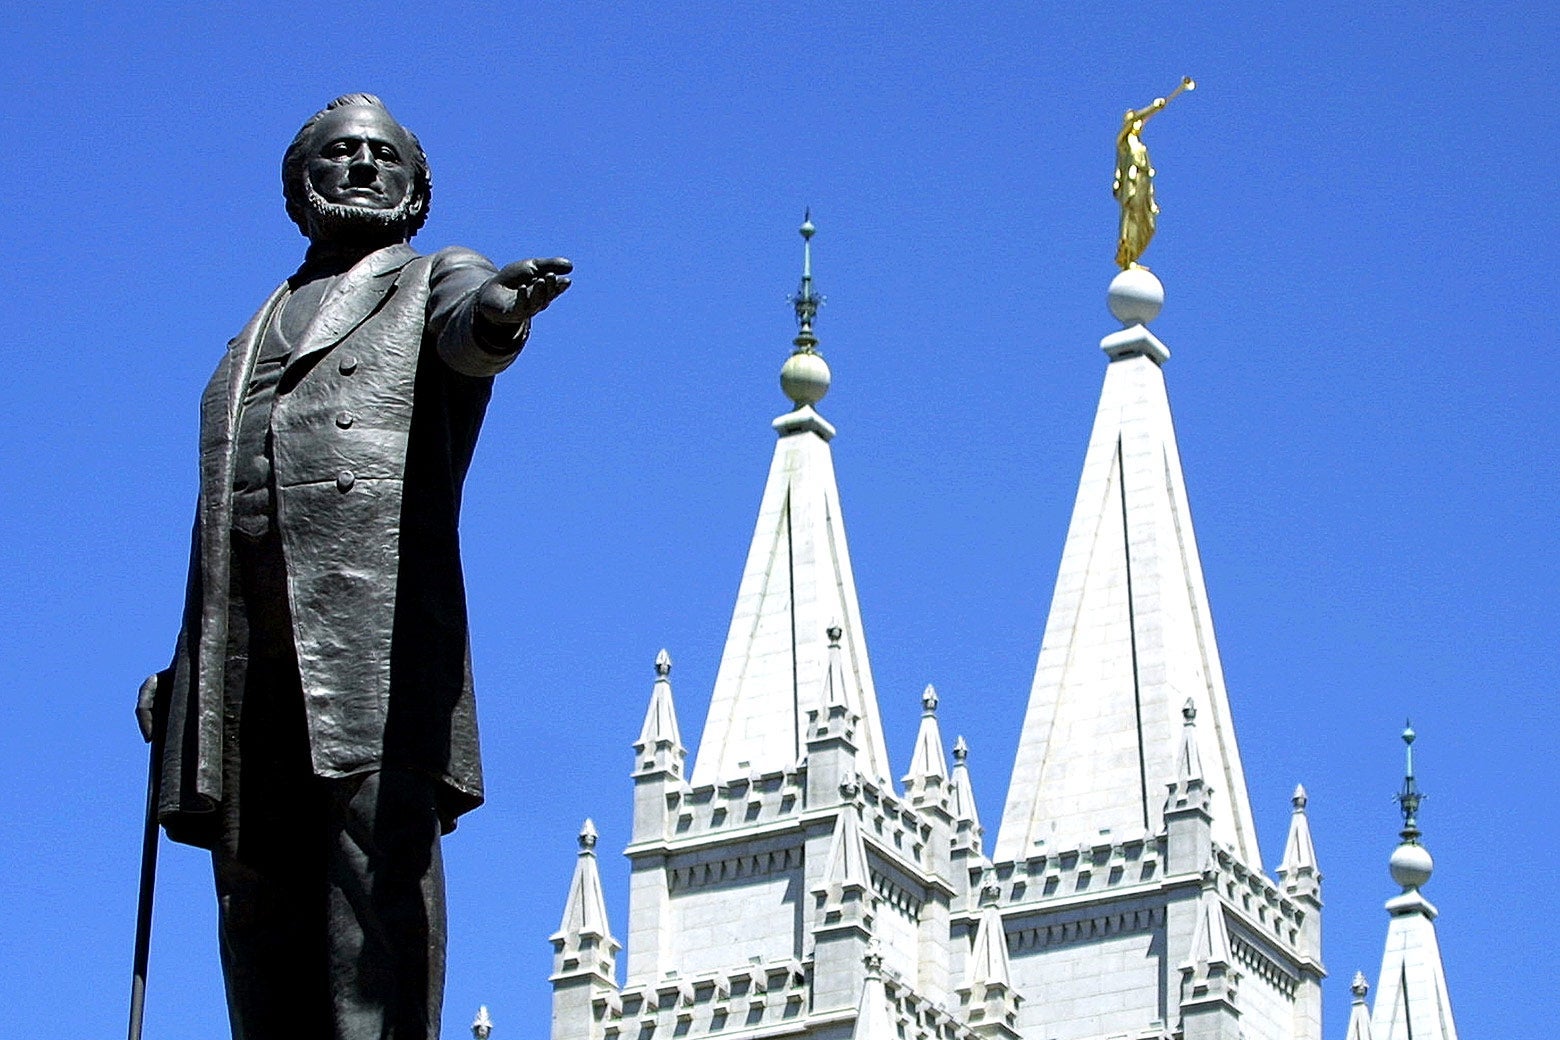 A statue of Brigham Young is seen beside a regal building.